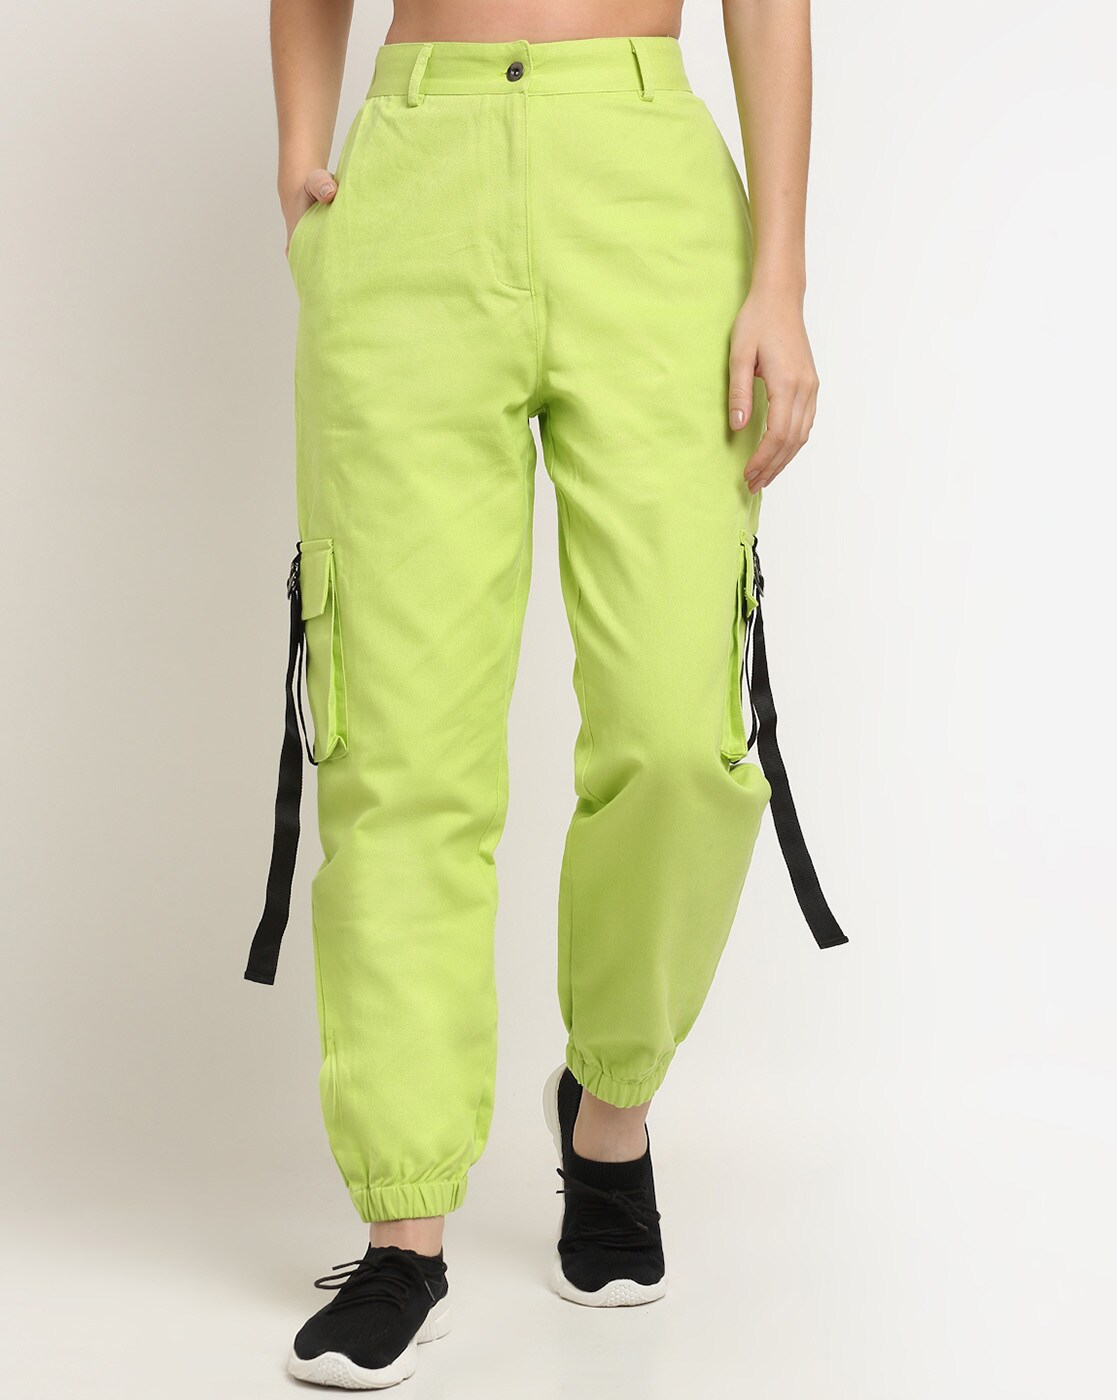 Neon Green Pants Color Block Bag  The Hunter Collector